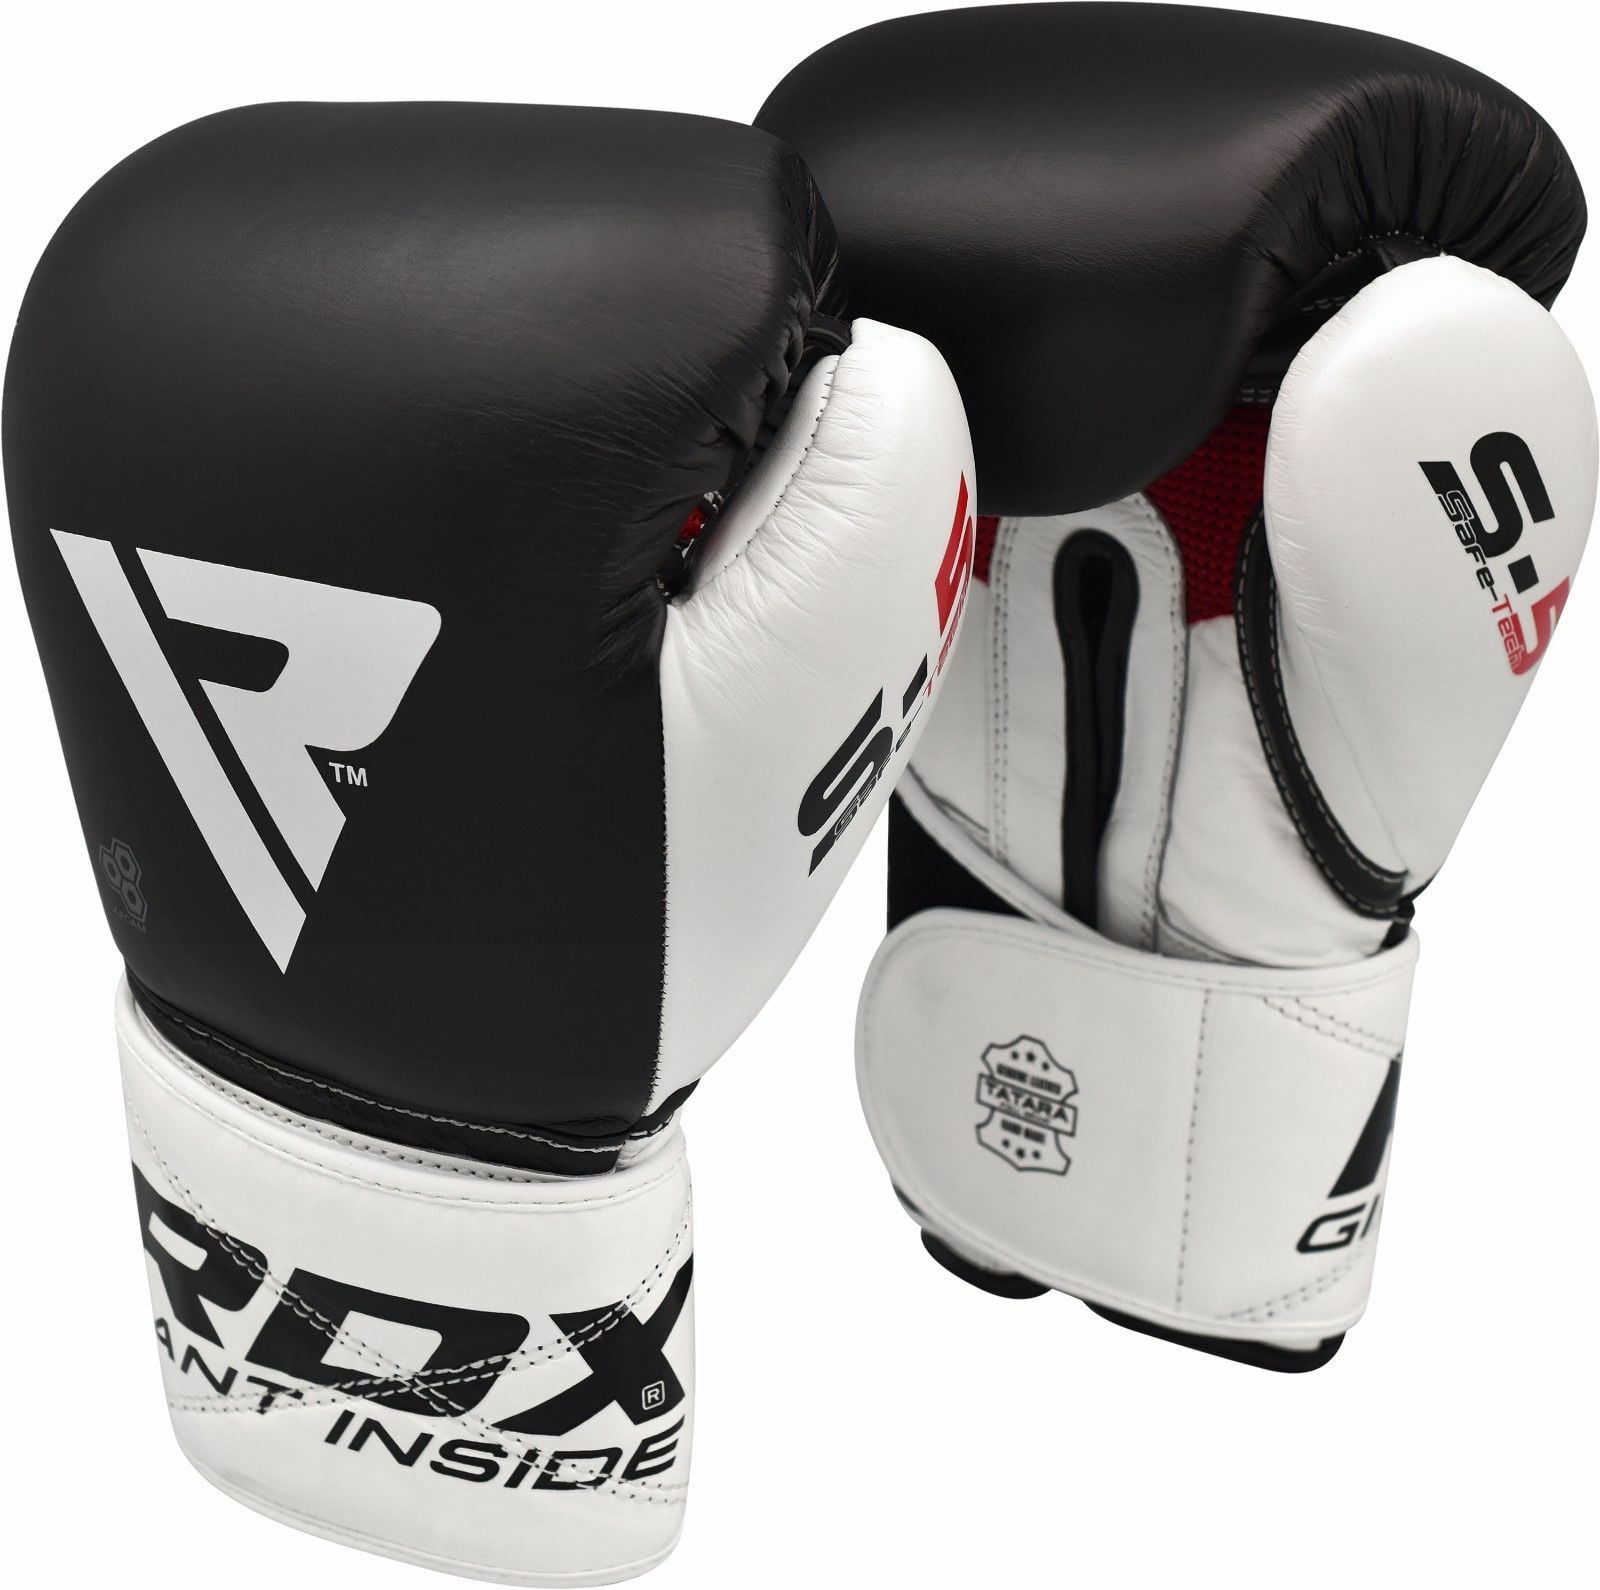 Kickboxing Double End Speed Ball Focus Pads Punching Fighting RDX Boxing Gloves for Training Muay Thai Maya Hide Leather Gloves for Sparring Punch Bags